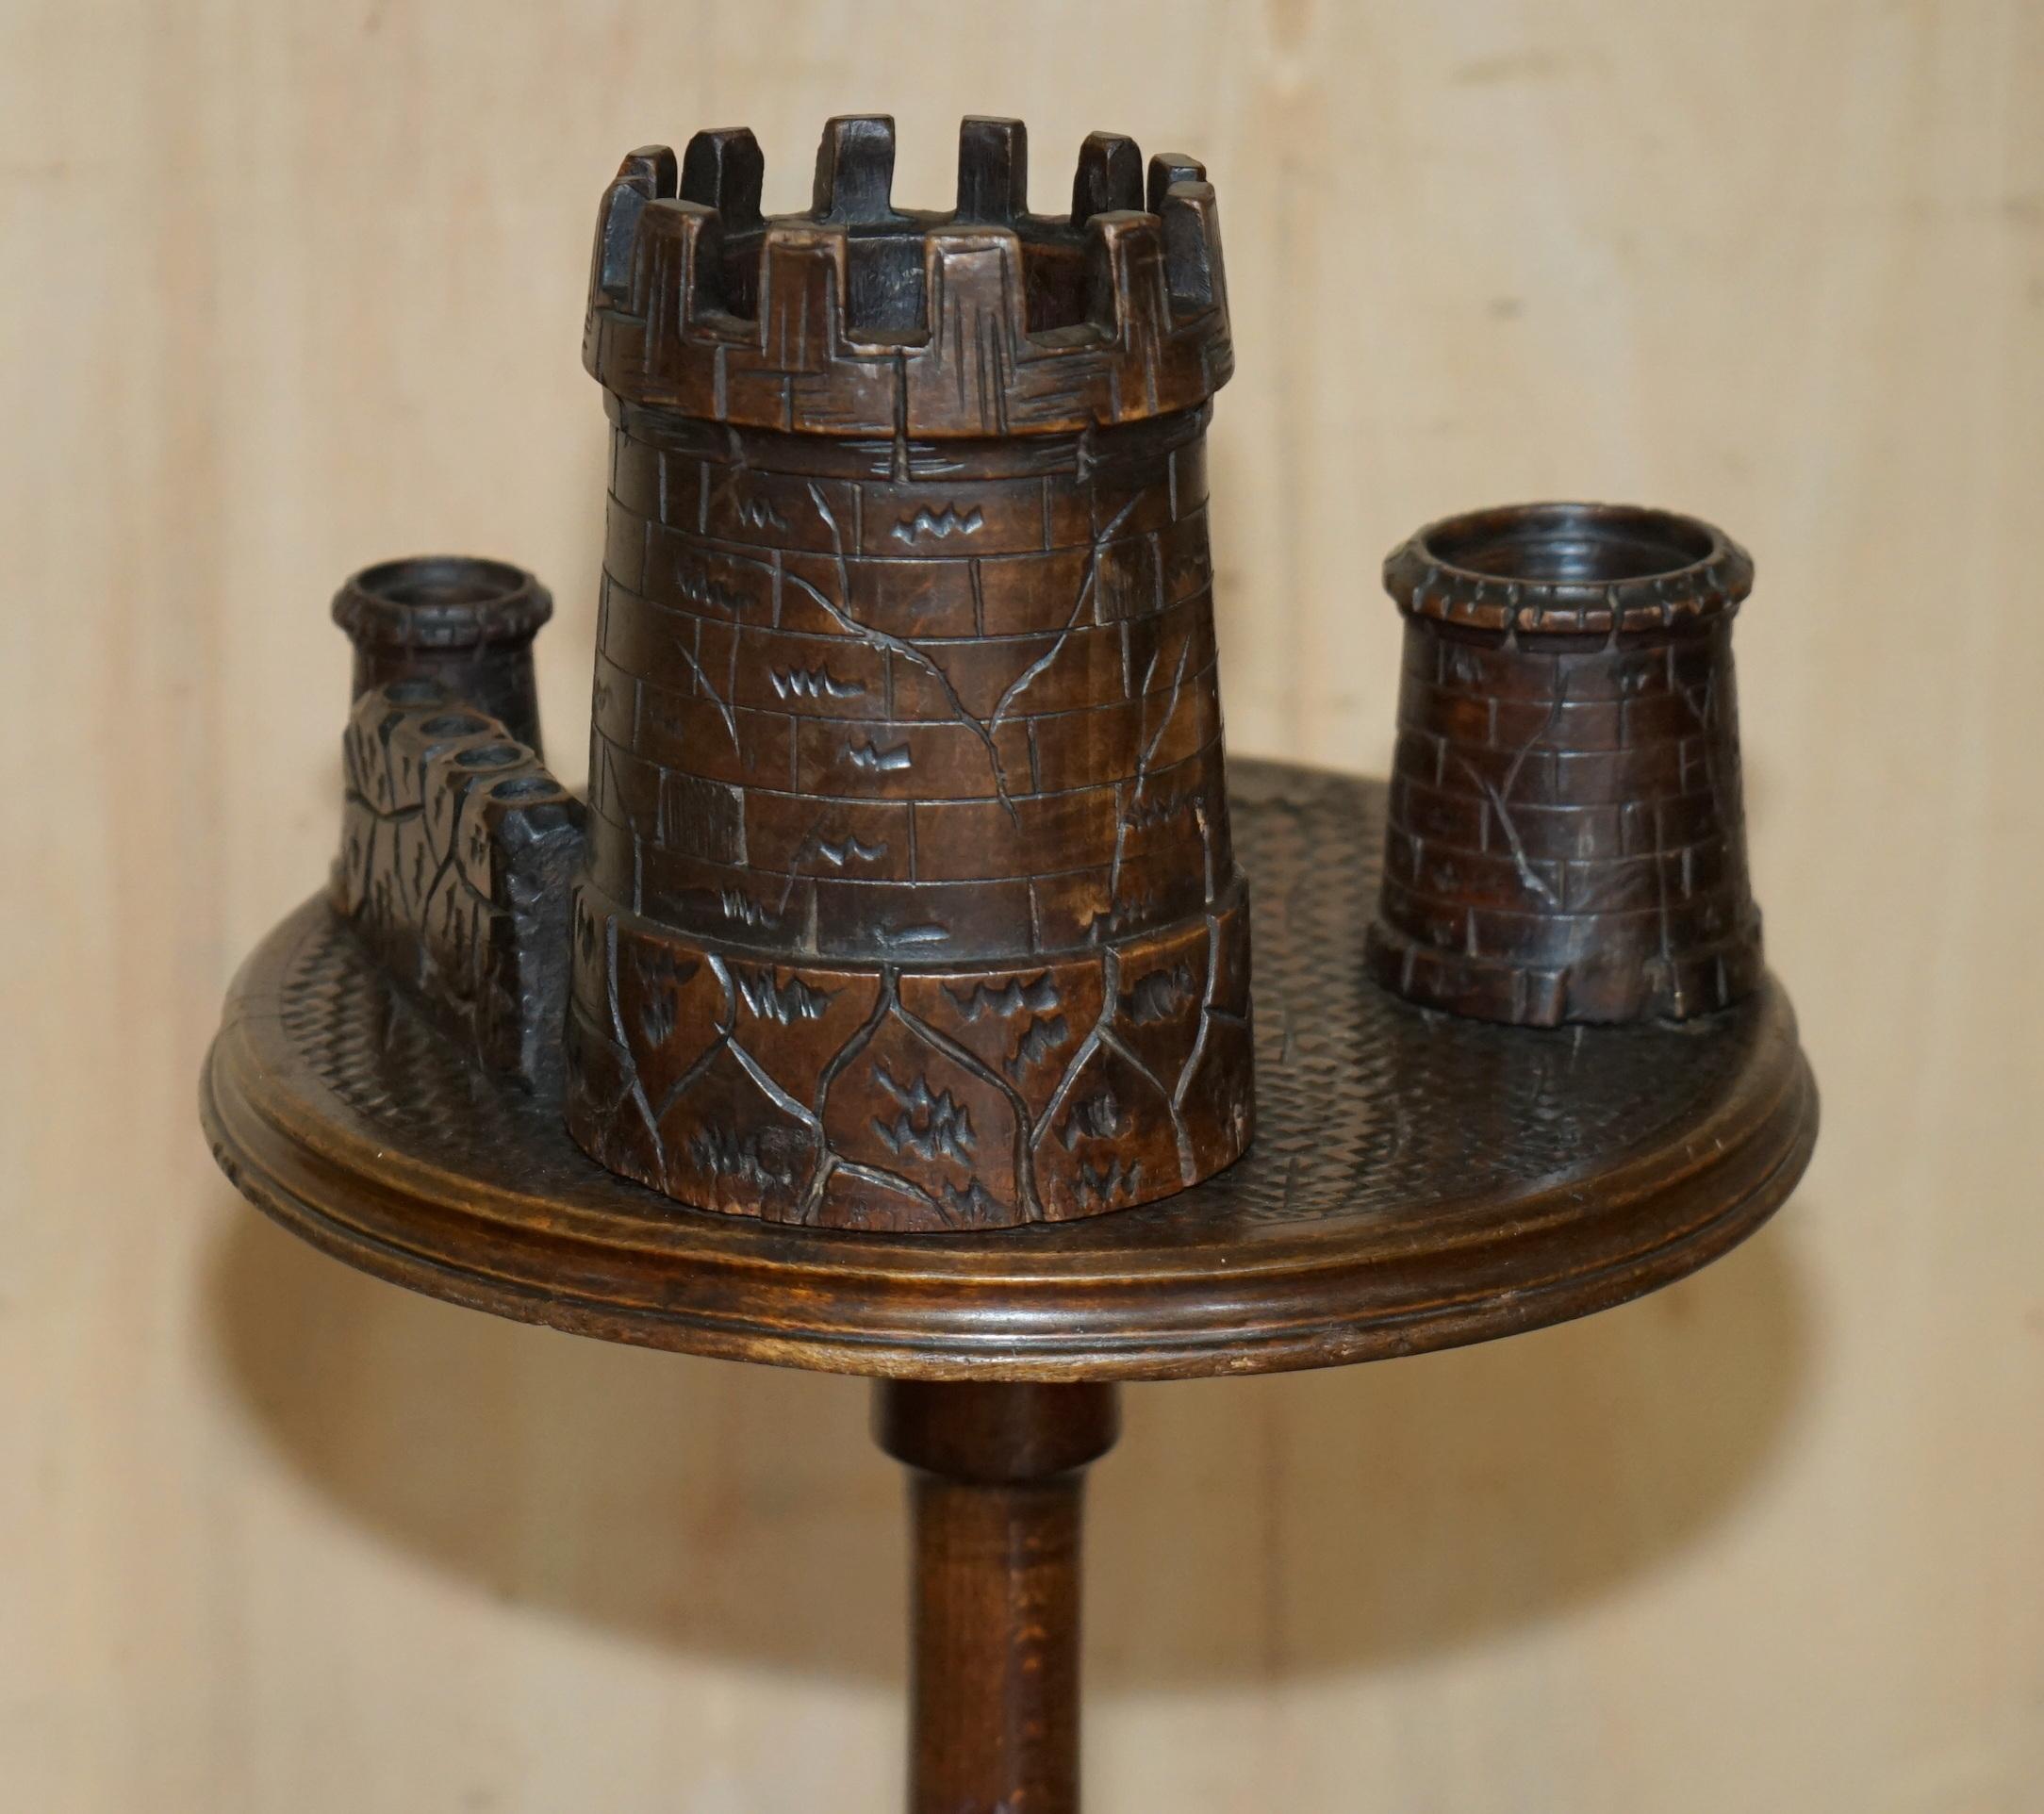 ANTIQUE ViCTORIAN SMOKERS SIDE TABLE DEPICTING CASTLES FOR PIPES TOBACCO CIGARS For Sale 8